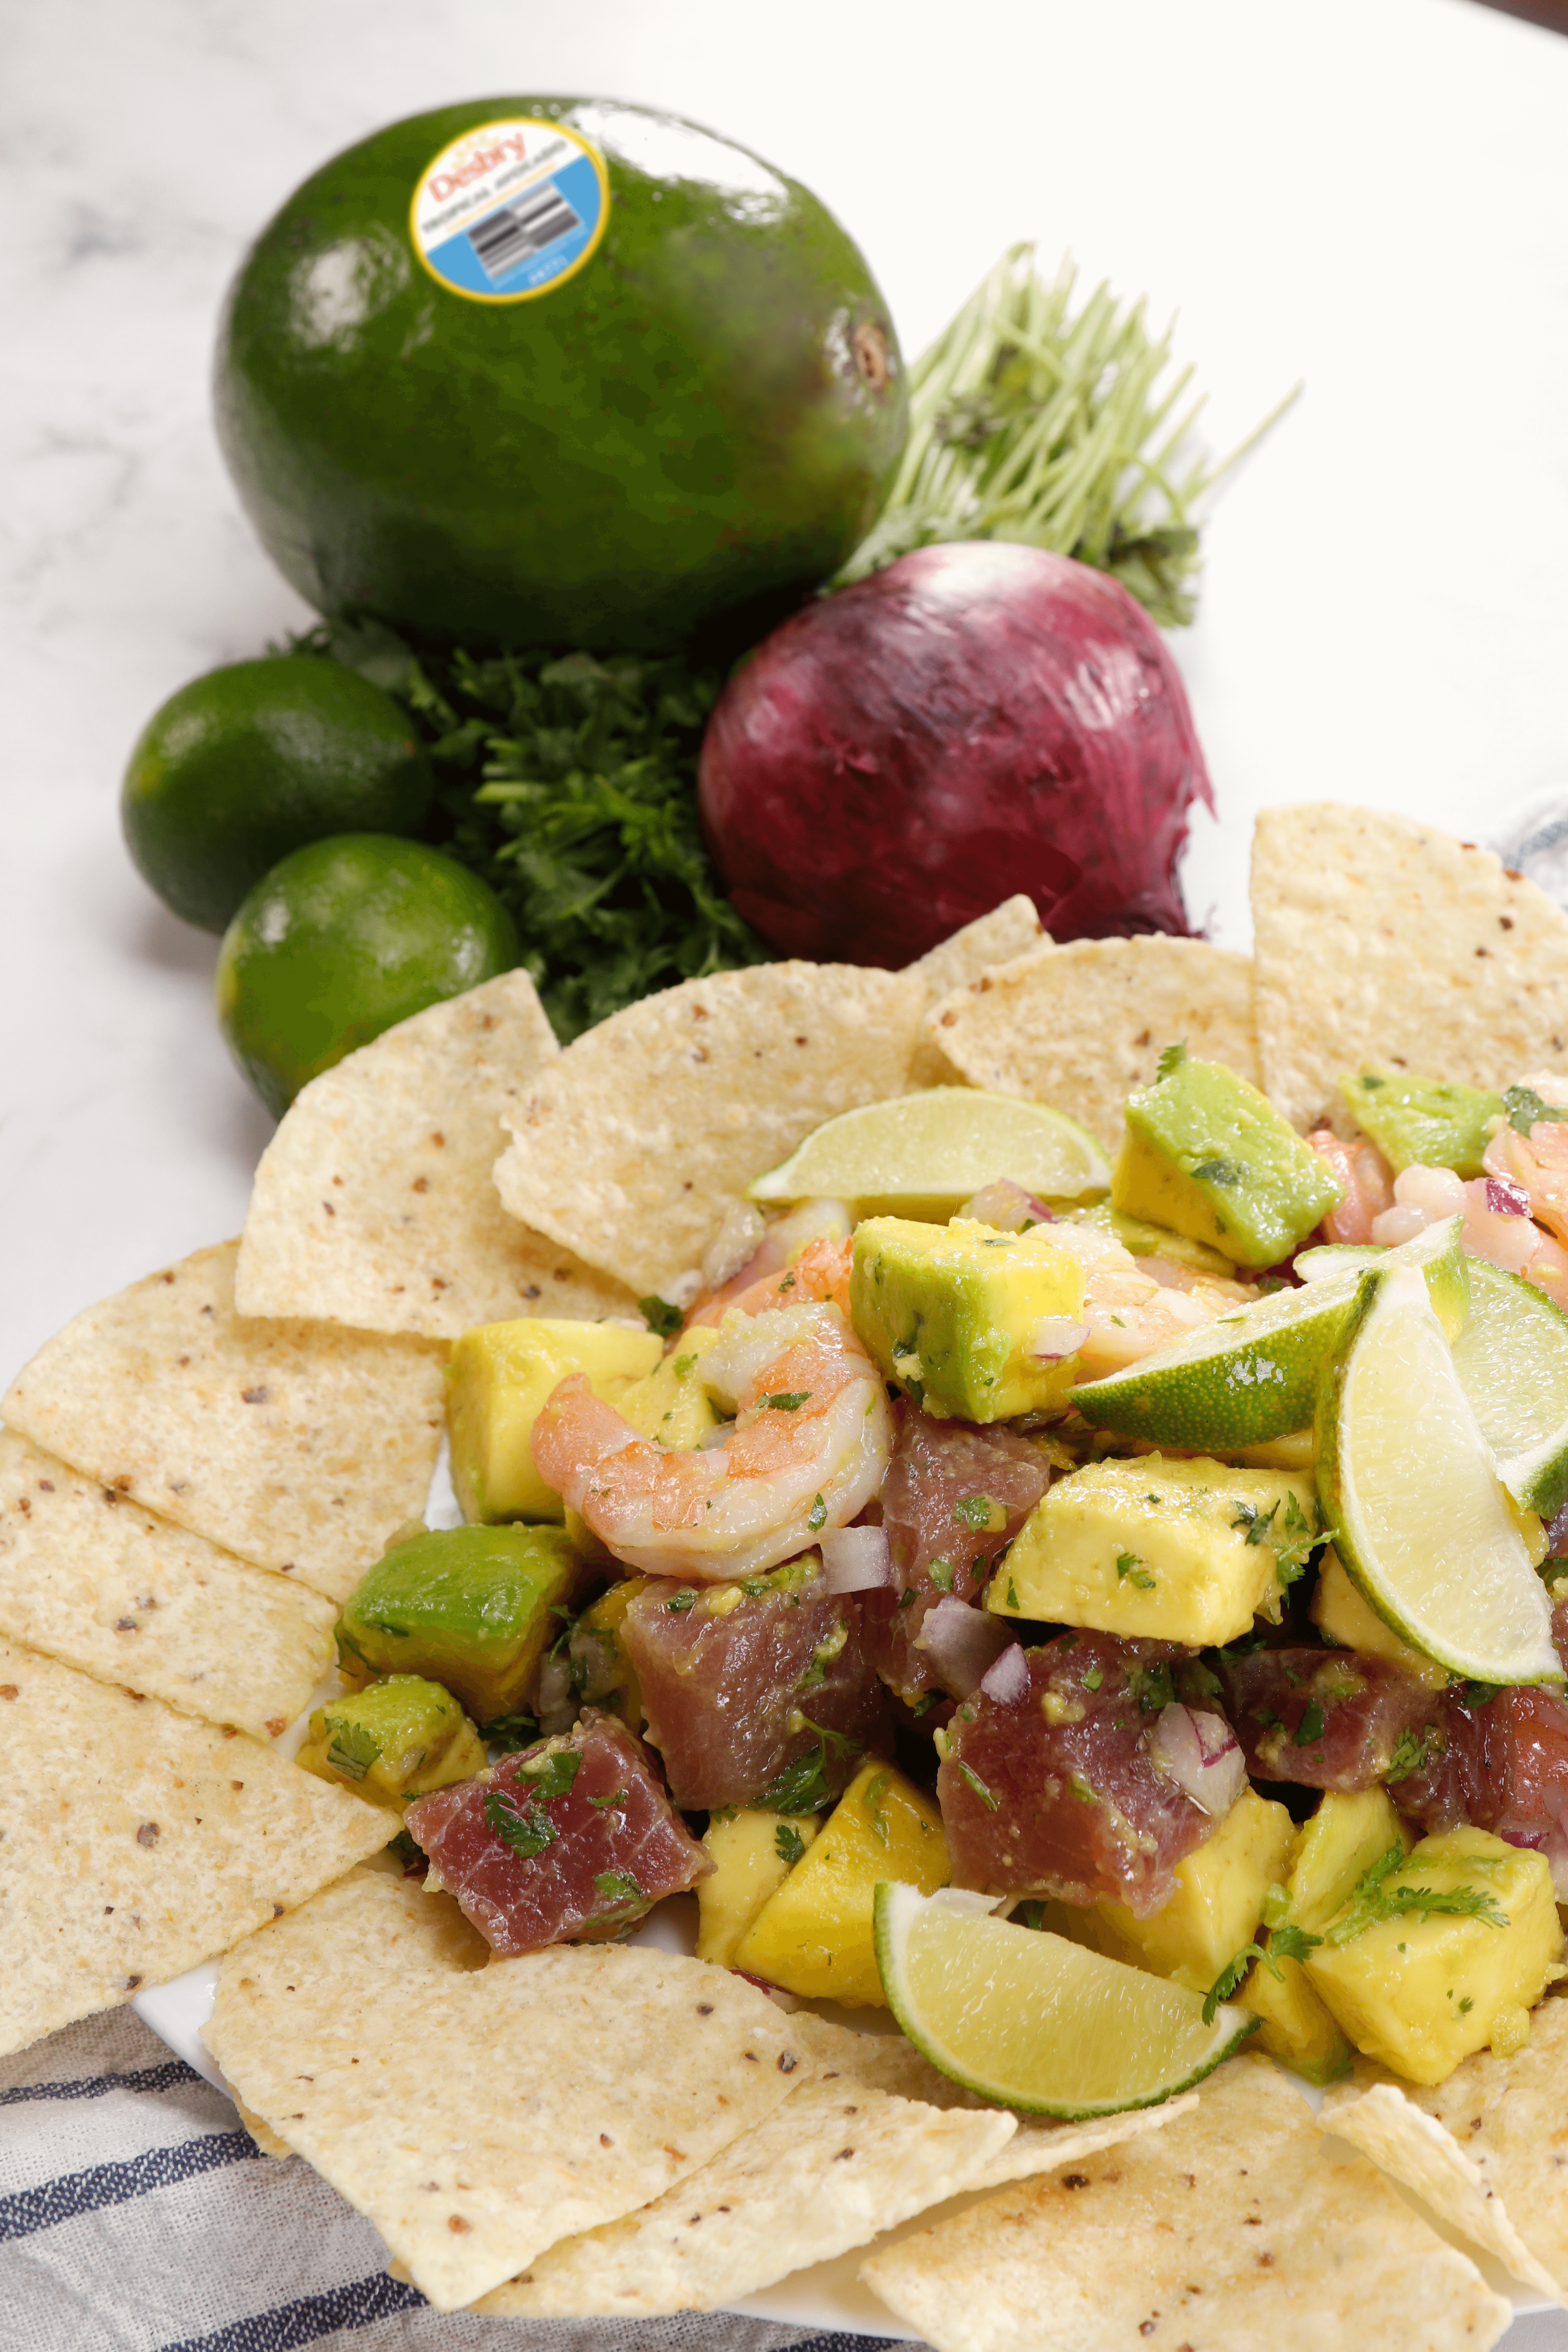 Chef Willy’s Tropical Avocado Ceviche Salad